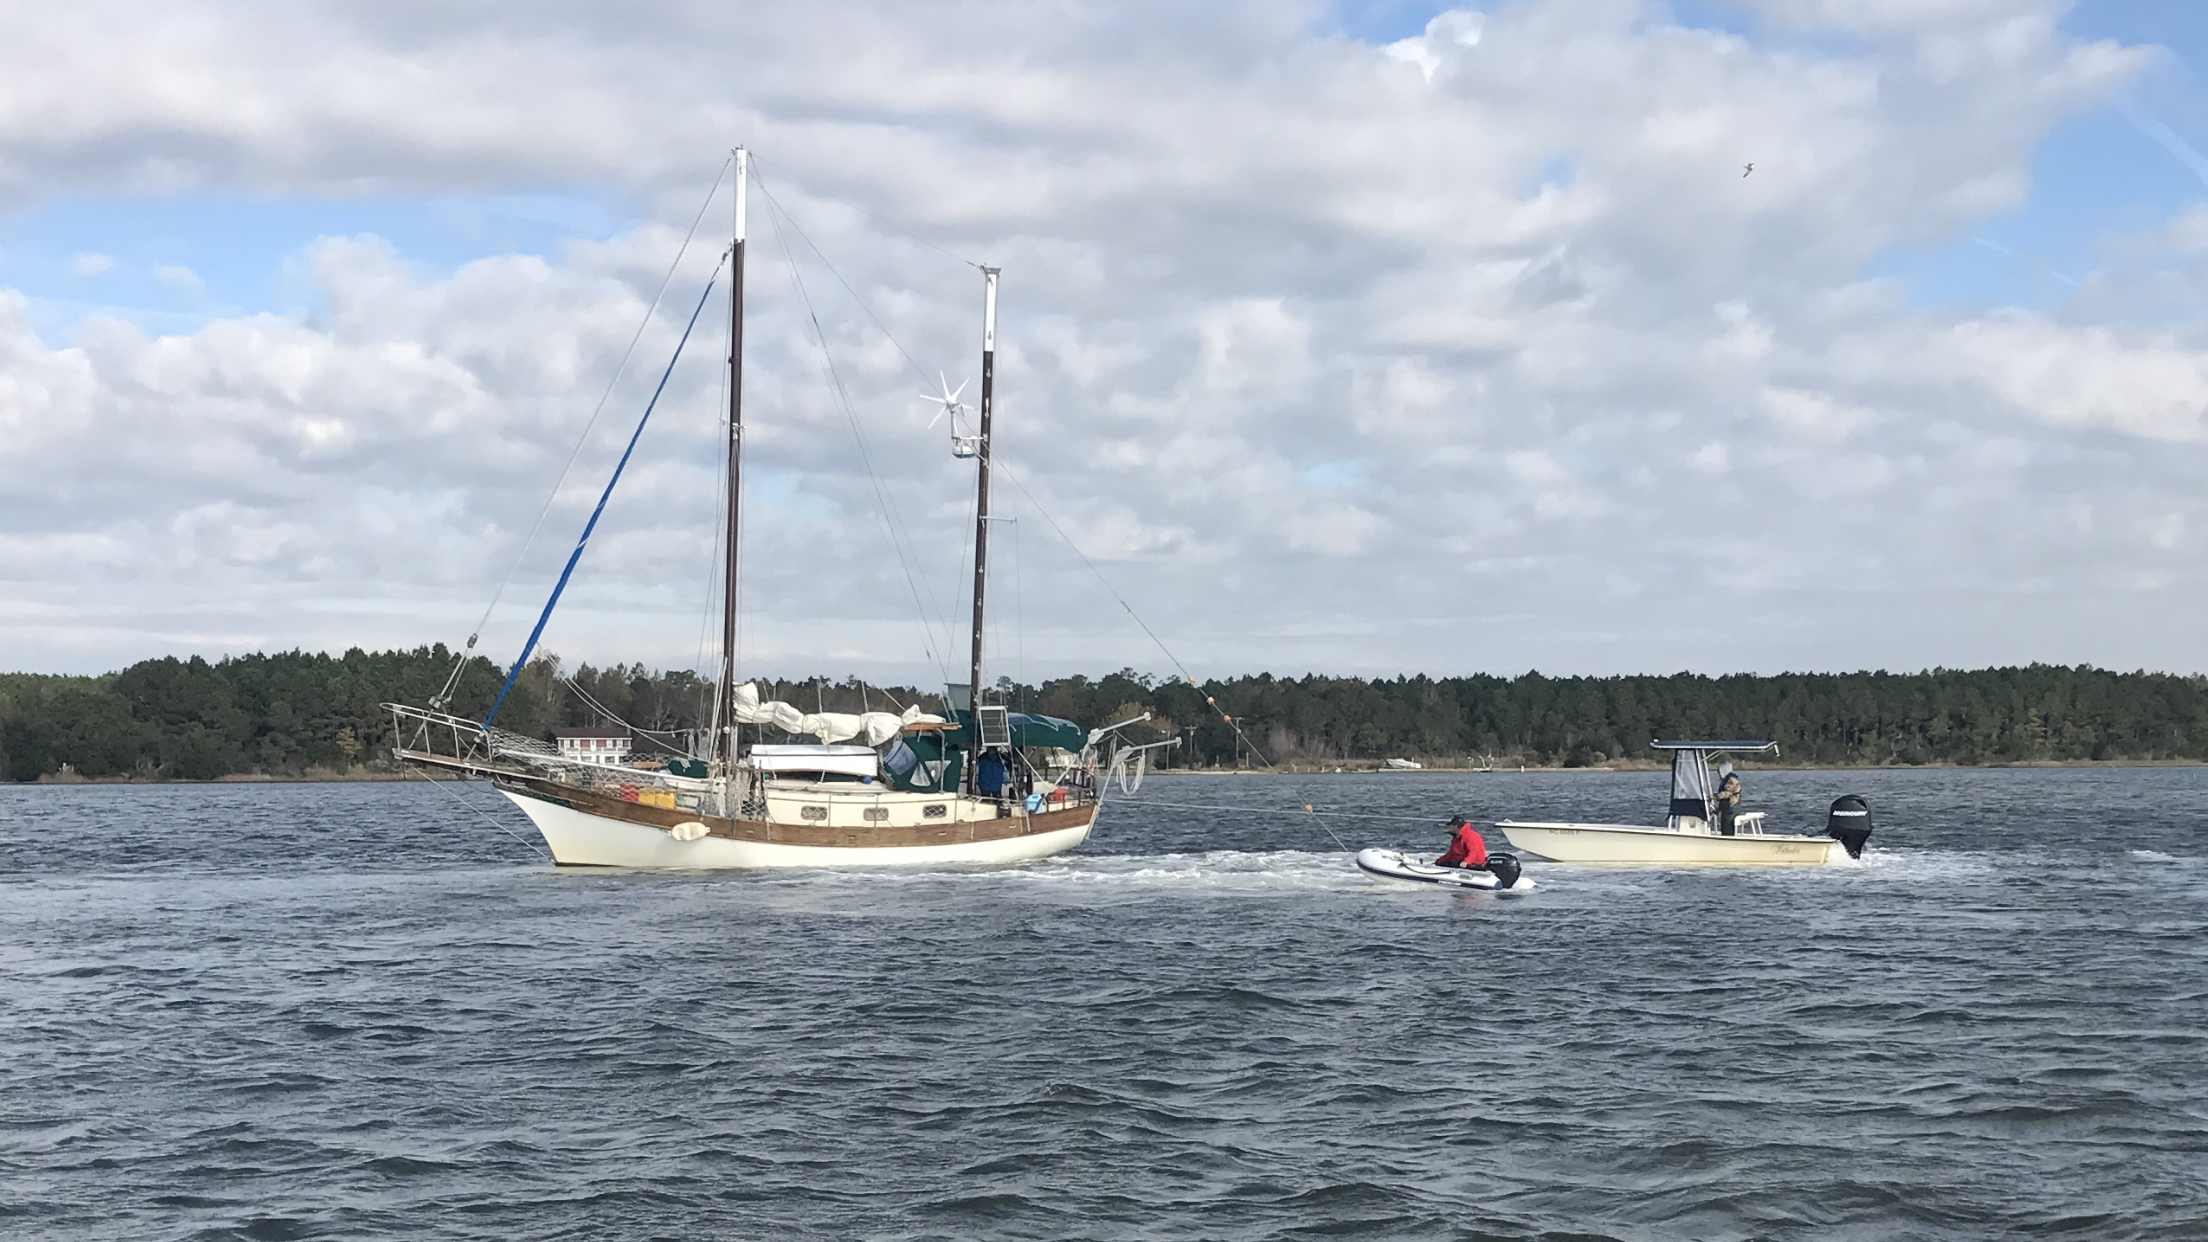 A sailboat aground in the ICW. The Captain is in the dingy trying to pull the boat over to reduce its draft and free it.